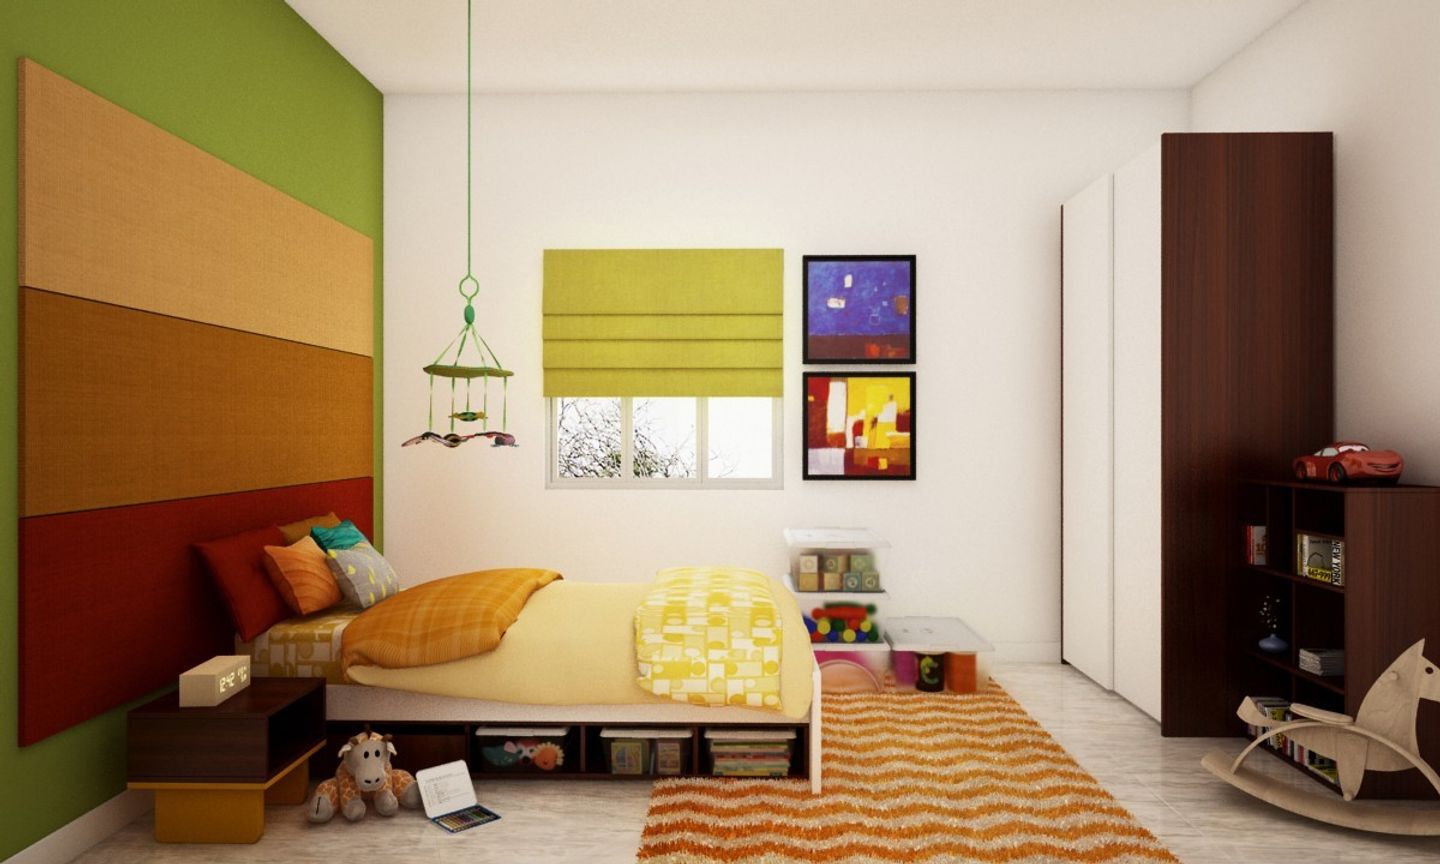 Contemporary Kid's Room Design With Wallpaint And Panelling